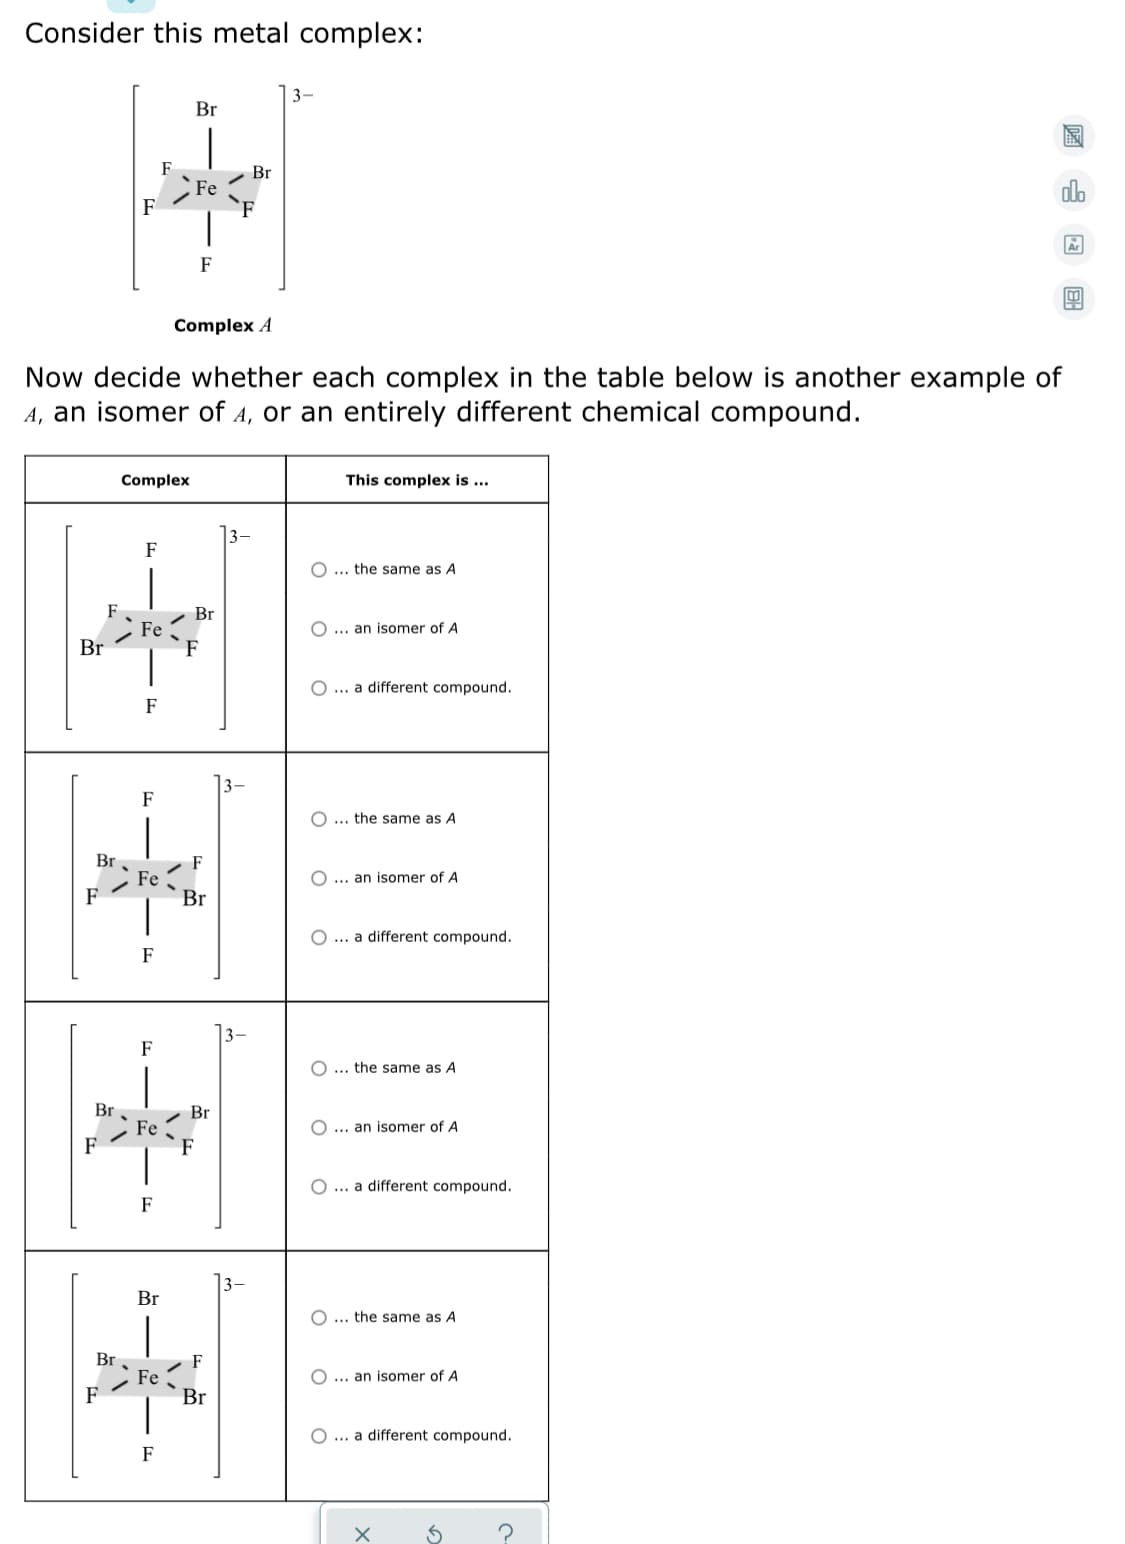 Consider this metal complex:
3-
Br
F
Br
Fe
dlo
F
F
Complex A
Now decide whether each complex in the table below is another example of
A, an isomer of A, or an entirely different chemical compound.
Complex
This complex is .
F
O ... the same as A
F
Fe
F
Br
... an isomer of A
Br
O ... a different compound.
F
|3–
F
... the same as A
Br
F - Fe -
Br
F
... an isomer of A
O ... a different compound.
F
F
O ... the same as A
Br
Fe
- Br
O ... an isomer of A
F
O ... a different compound.
F
Br
O ... the same as A
Br
F
Br
Fe
O ... an isomer of A
F
O ... a different compound.
F
